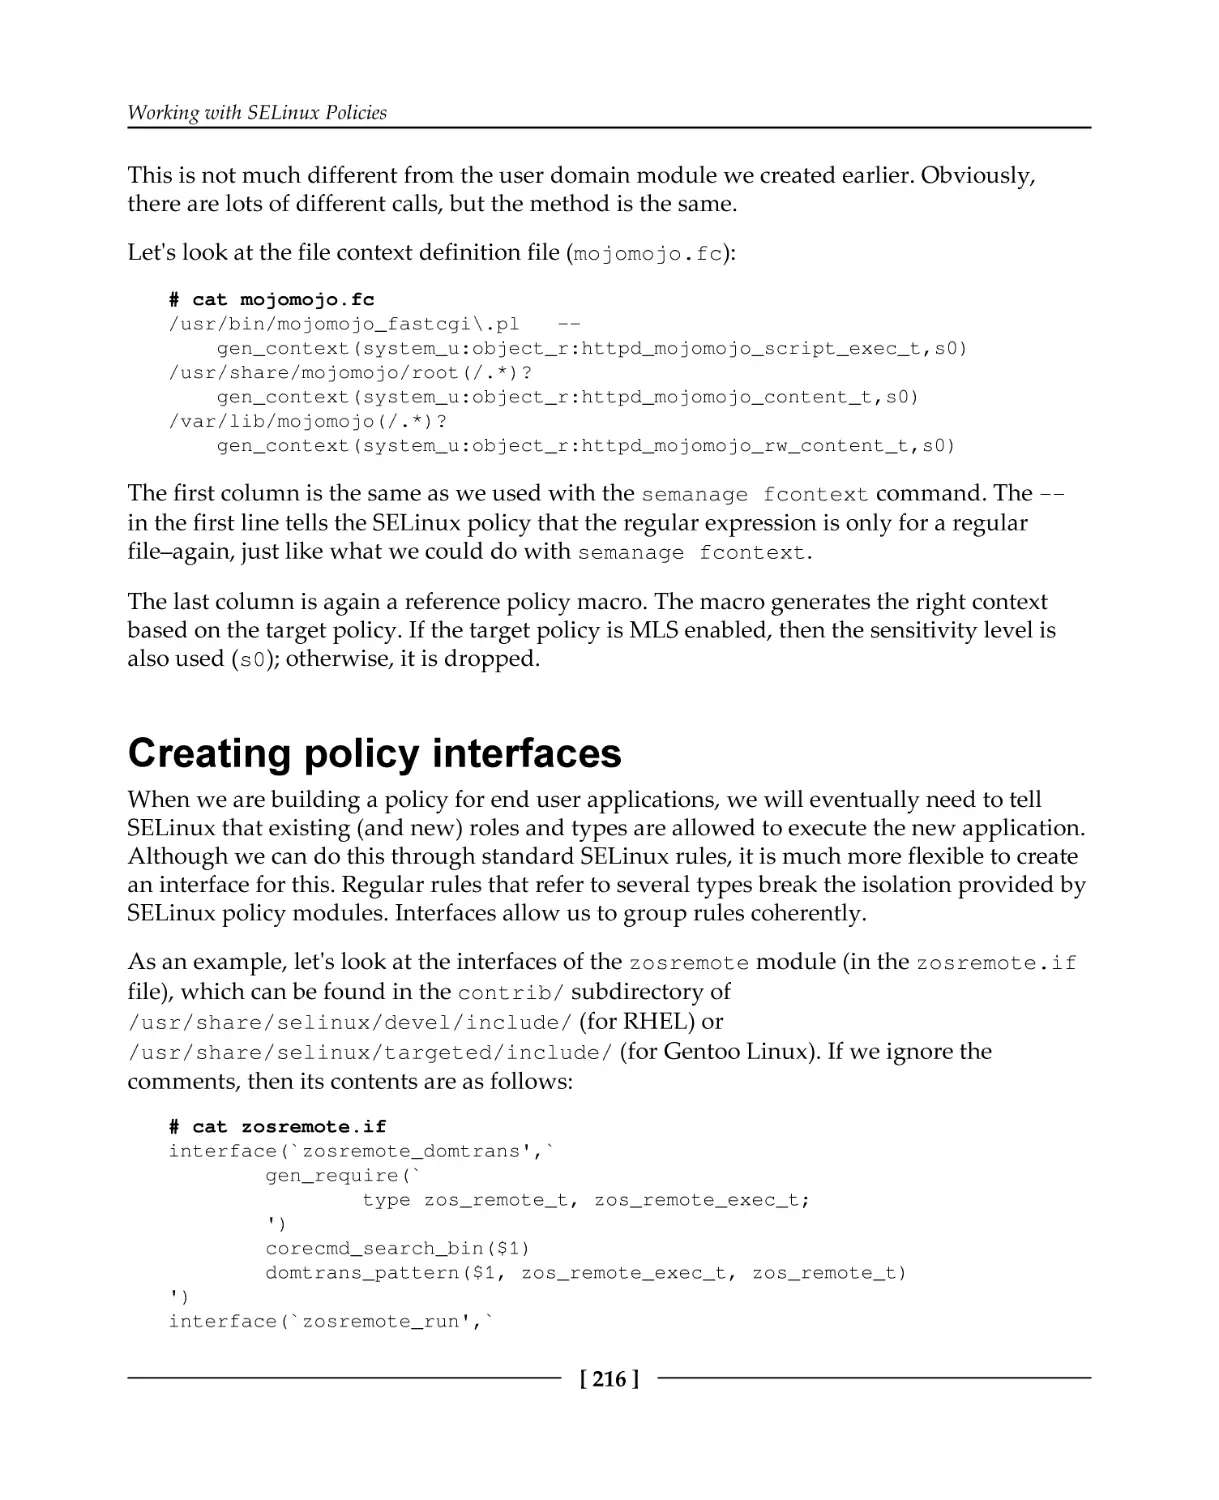 Creating policy interfaces